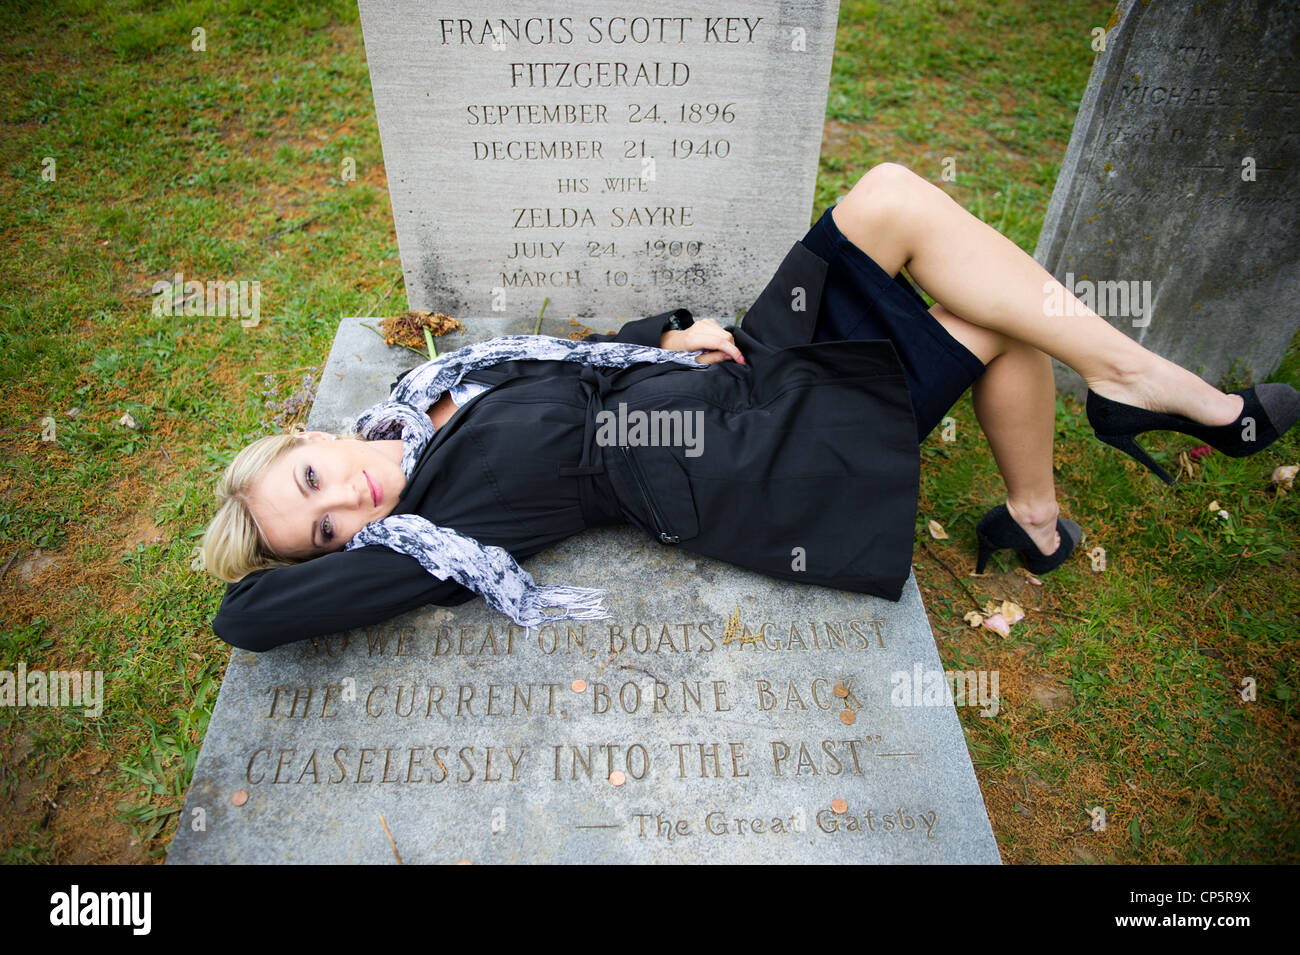 Pushing up the Daisy - Blonde woman at F.Scott Fitzgerald Gravesite with Great Gatsby quote, Rockville Maryland Stock Photo